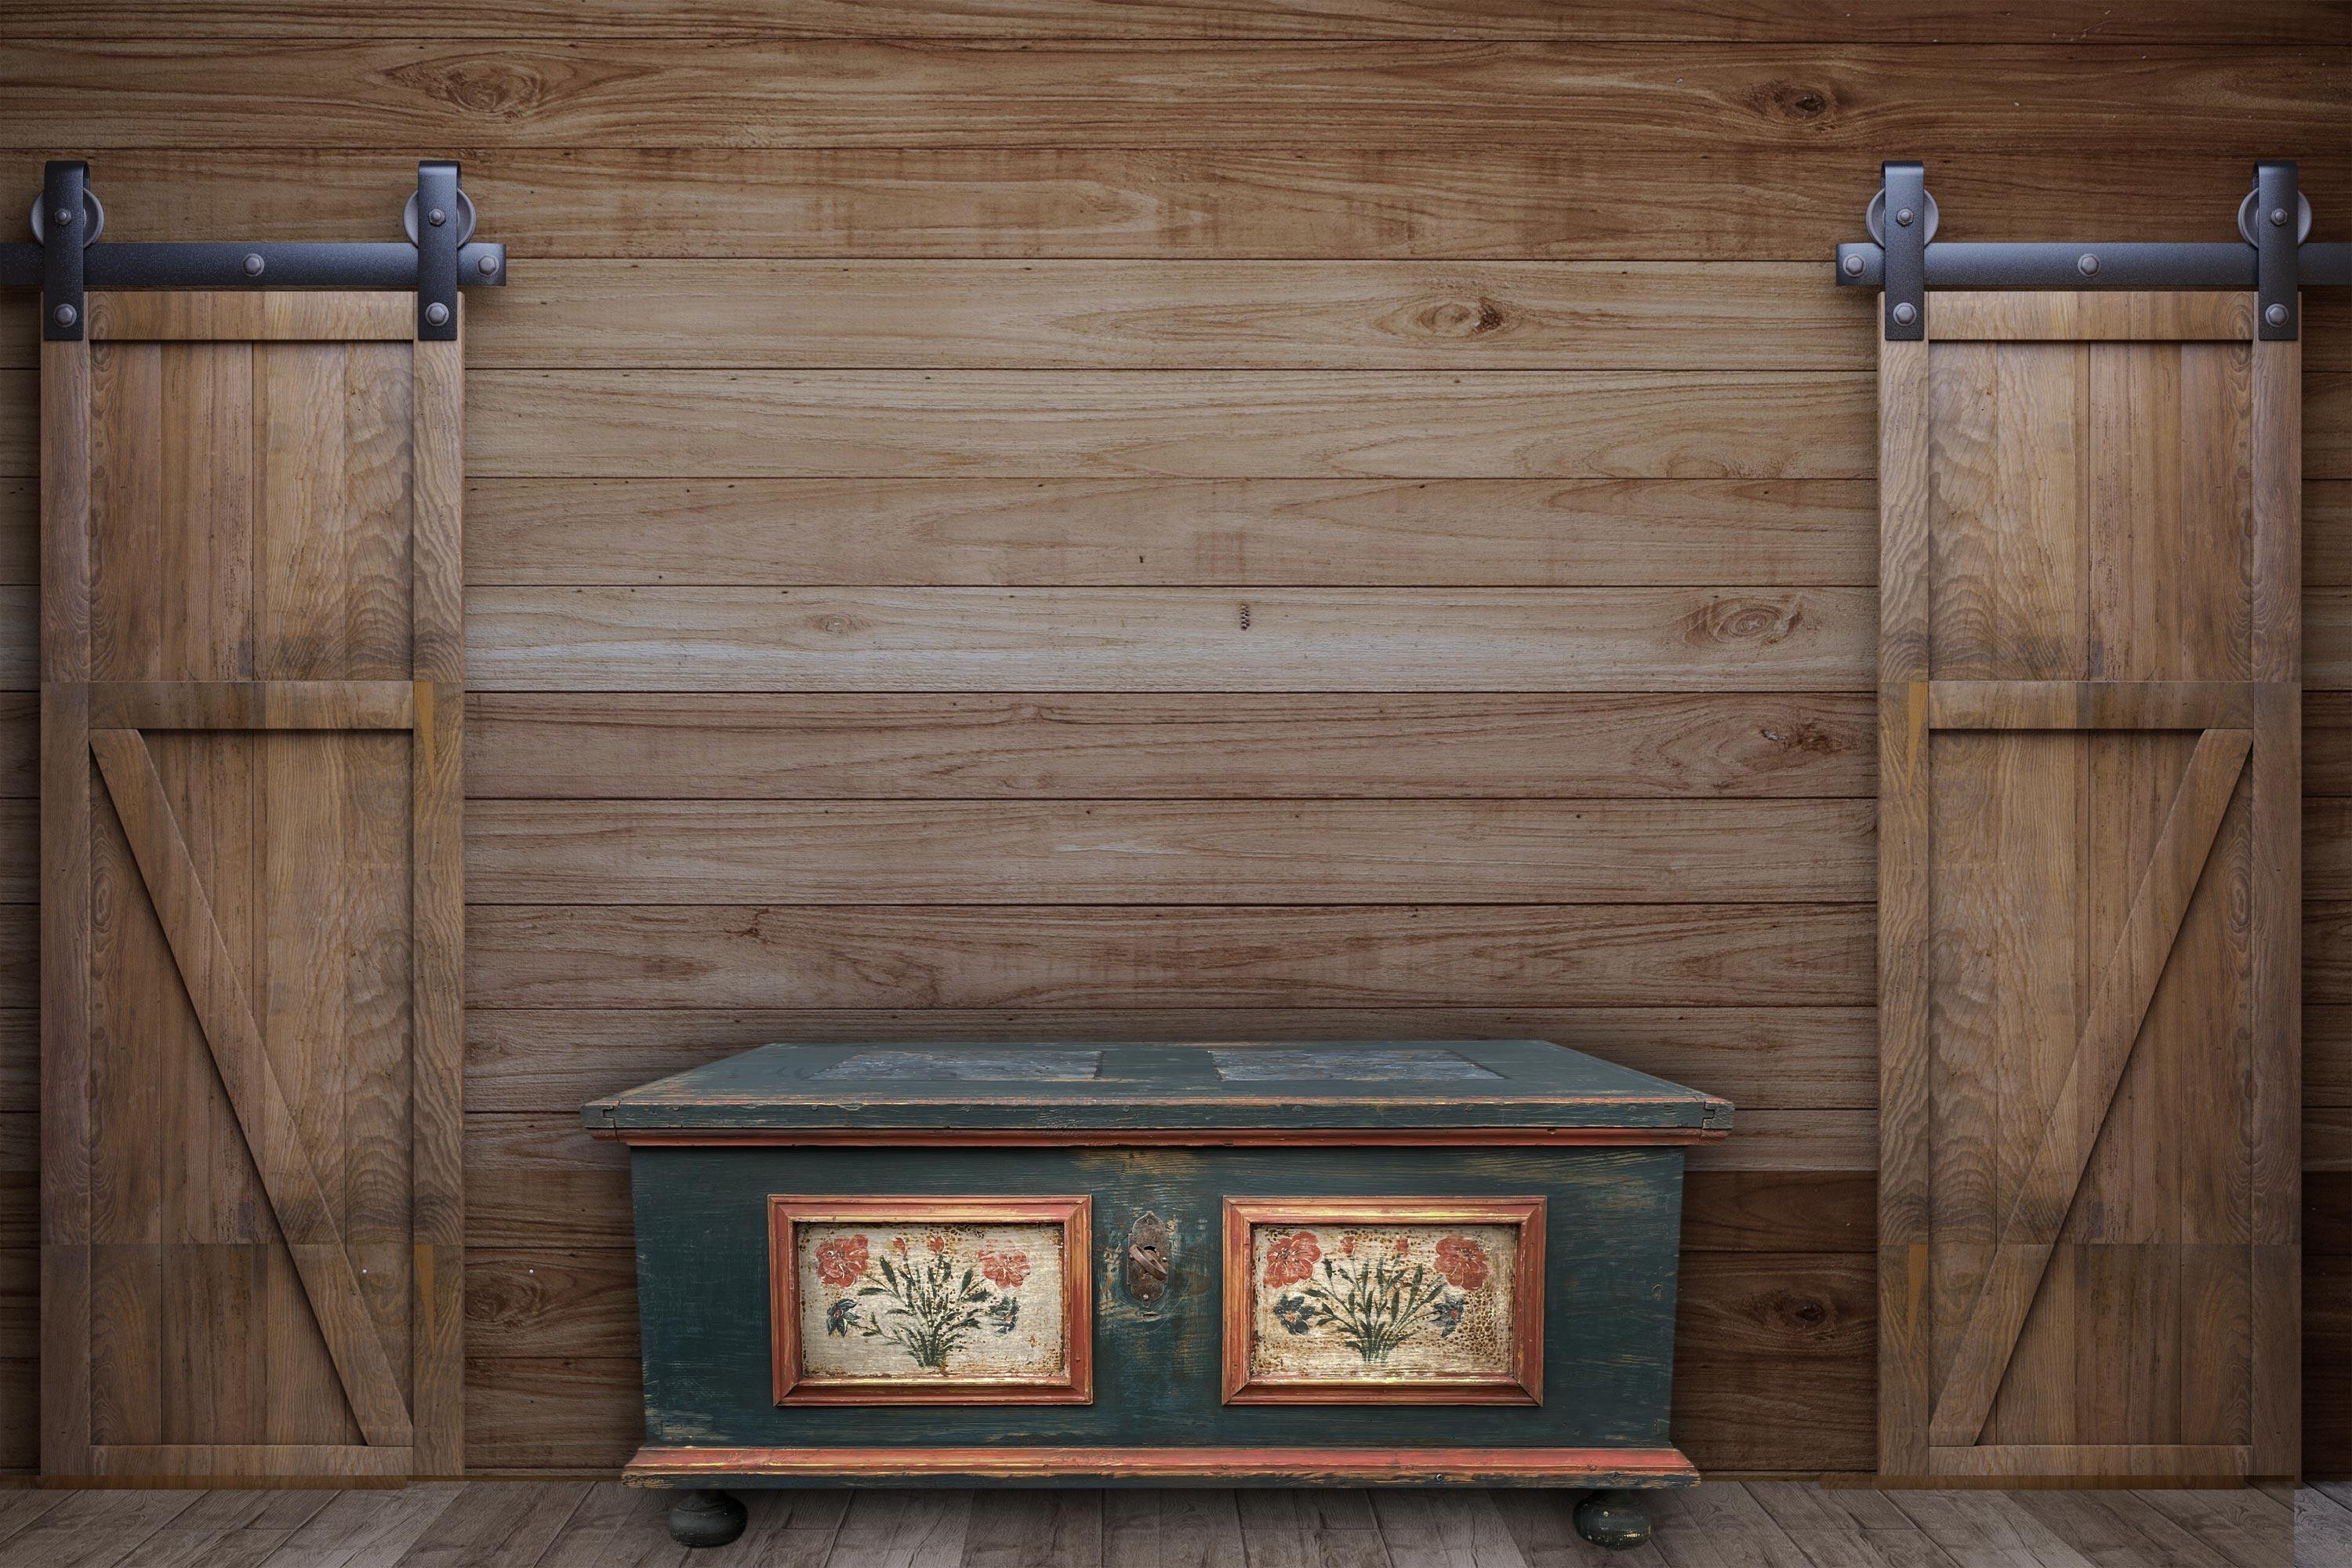 Early 19th Century Blu Floral Painted Blanket Chest 10